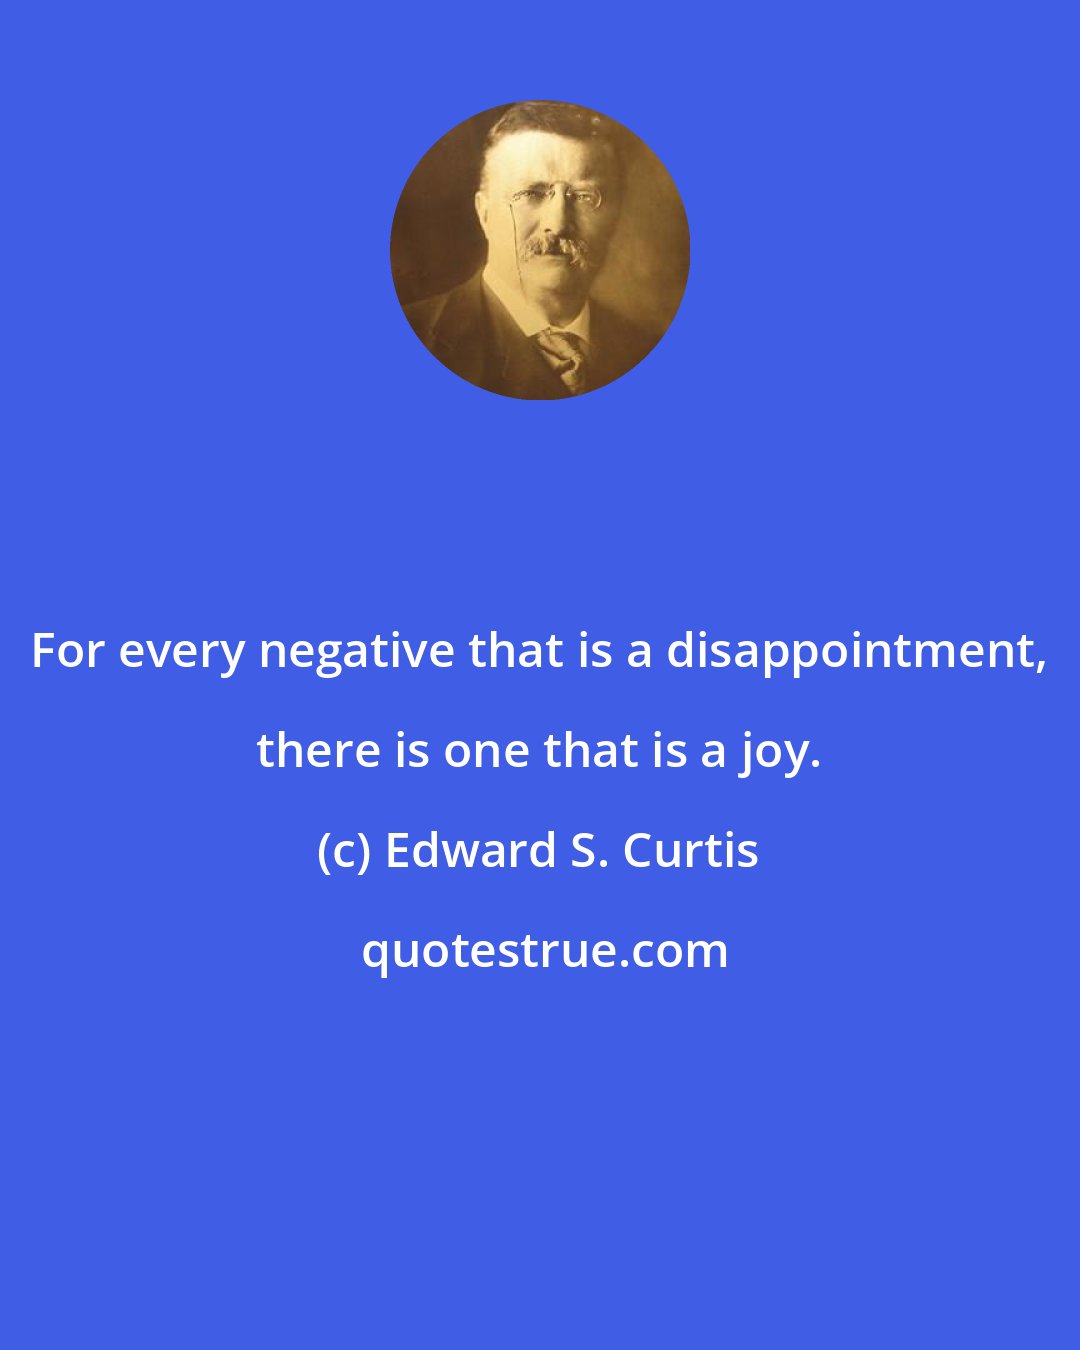 Edward S. Curtis: For every negative that is a disappointment, there is one that is a joy.